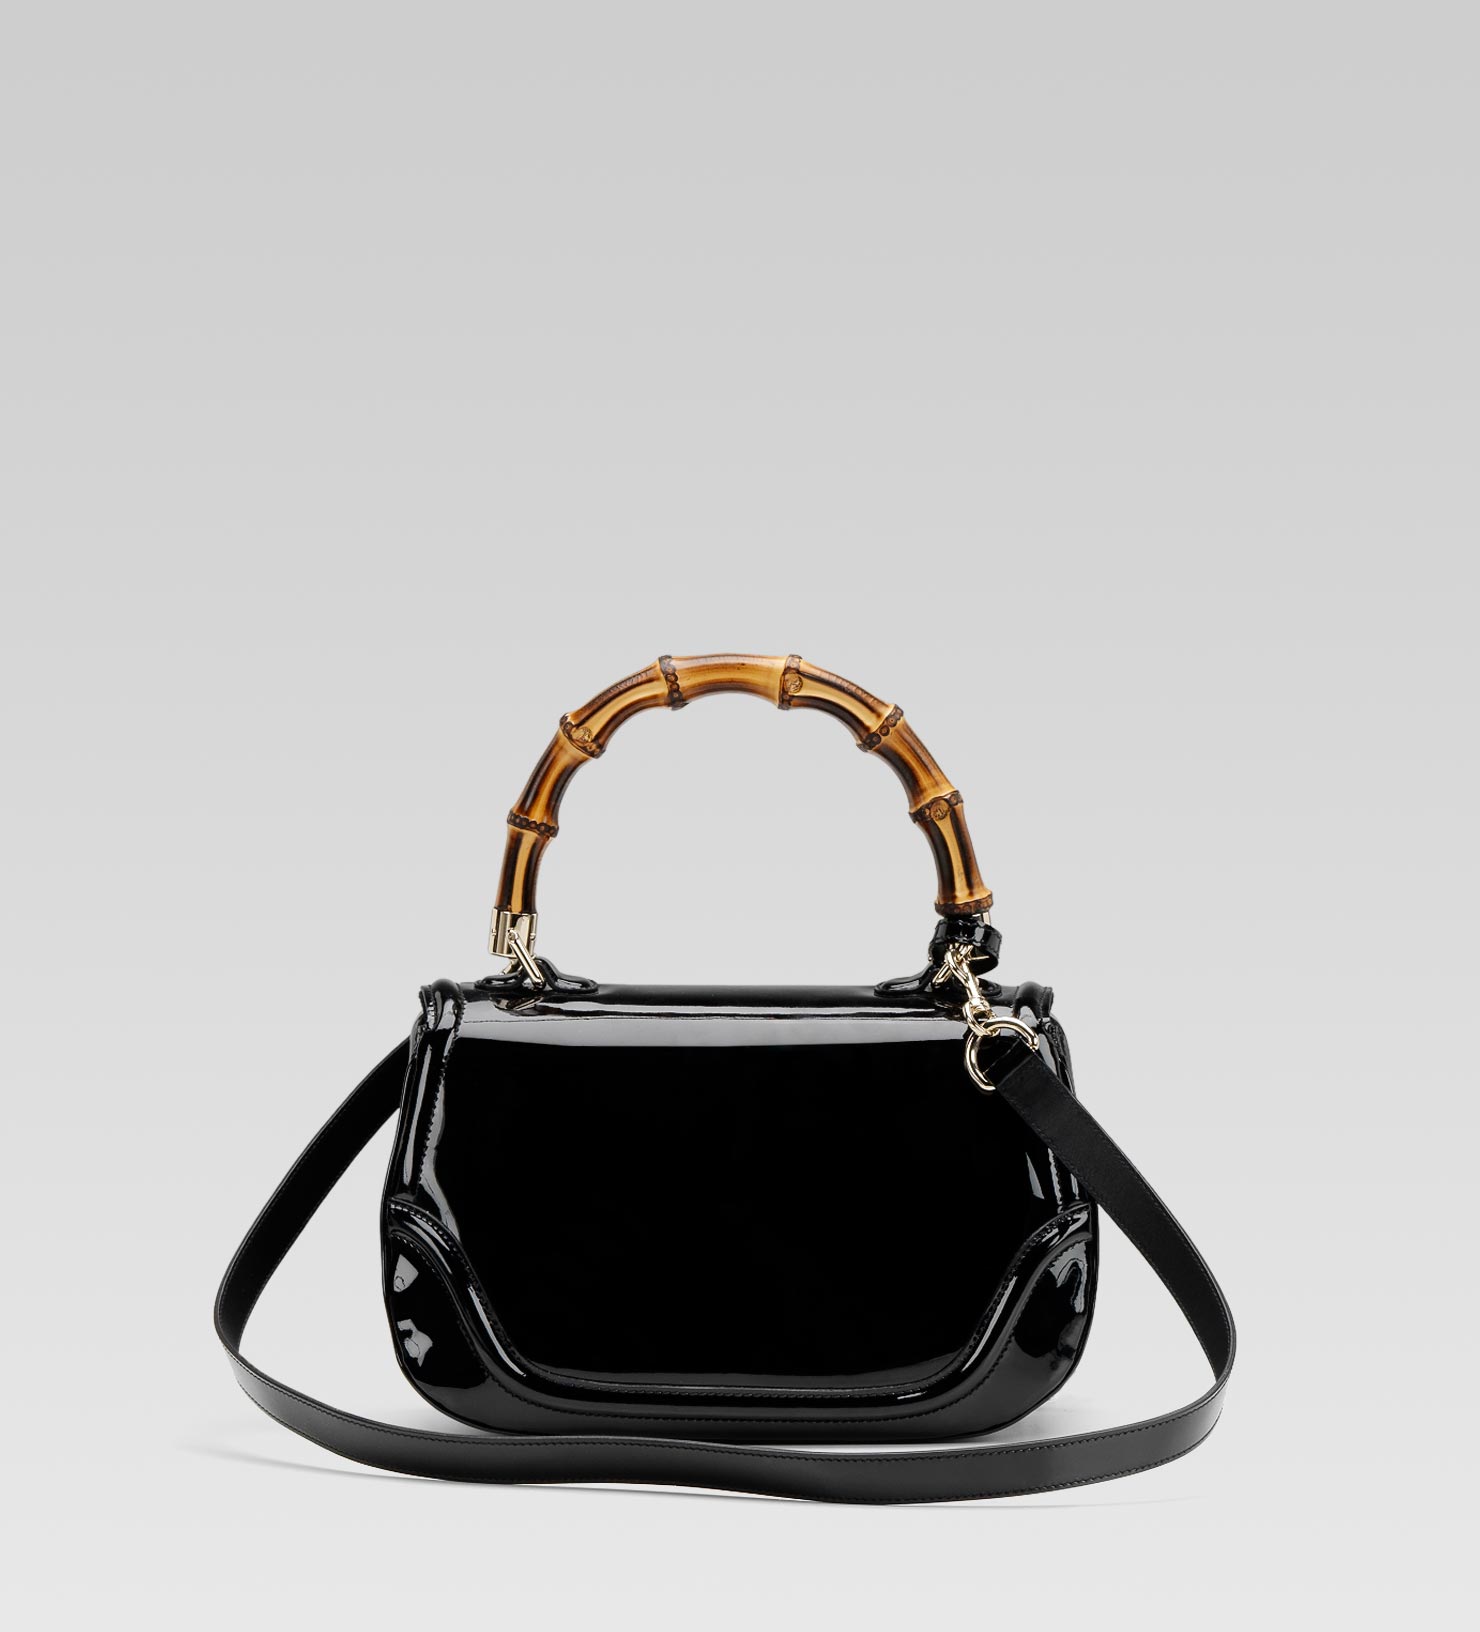 Gucci New Bamboo Patent Leather Top Handle Bag in Black - Lyst